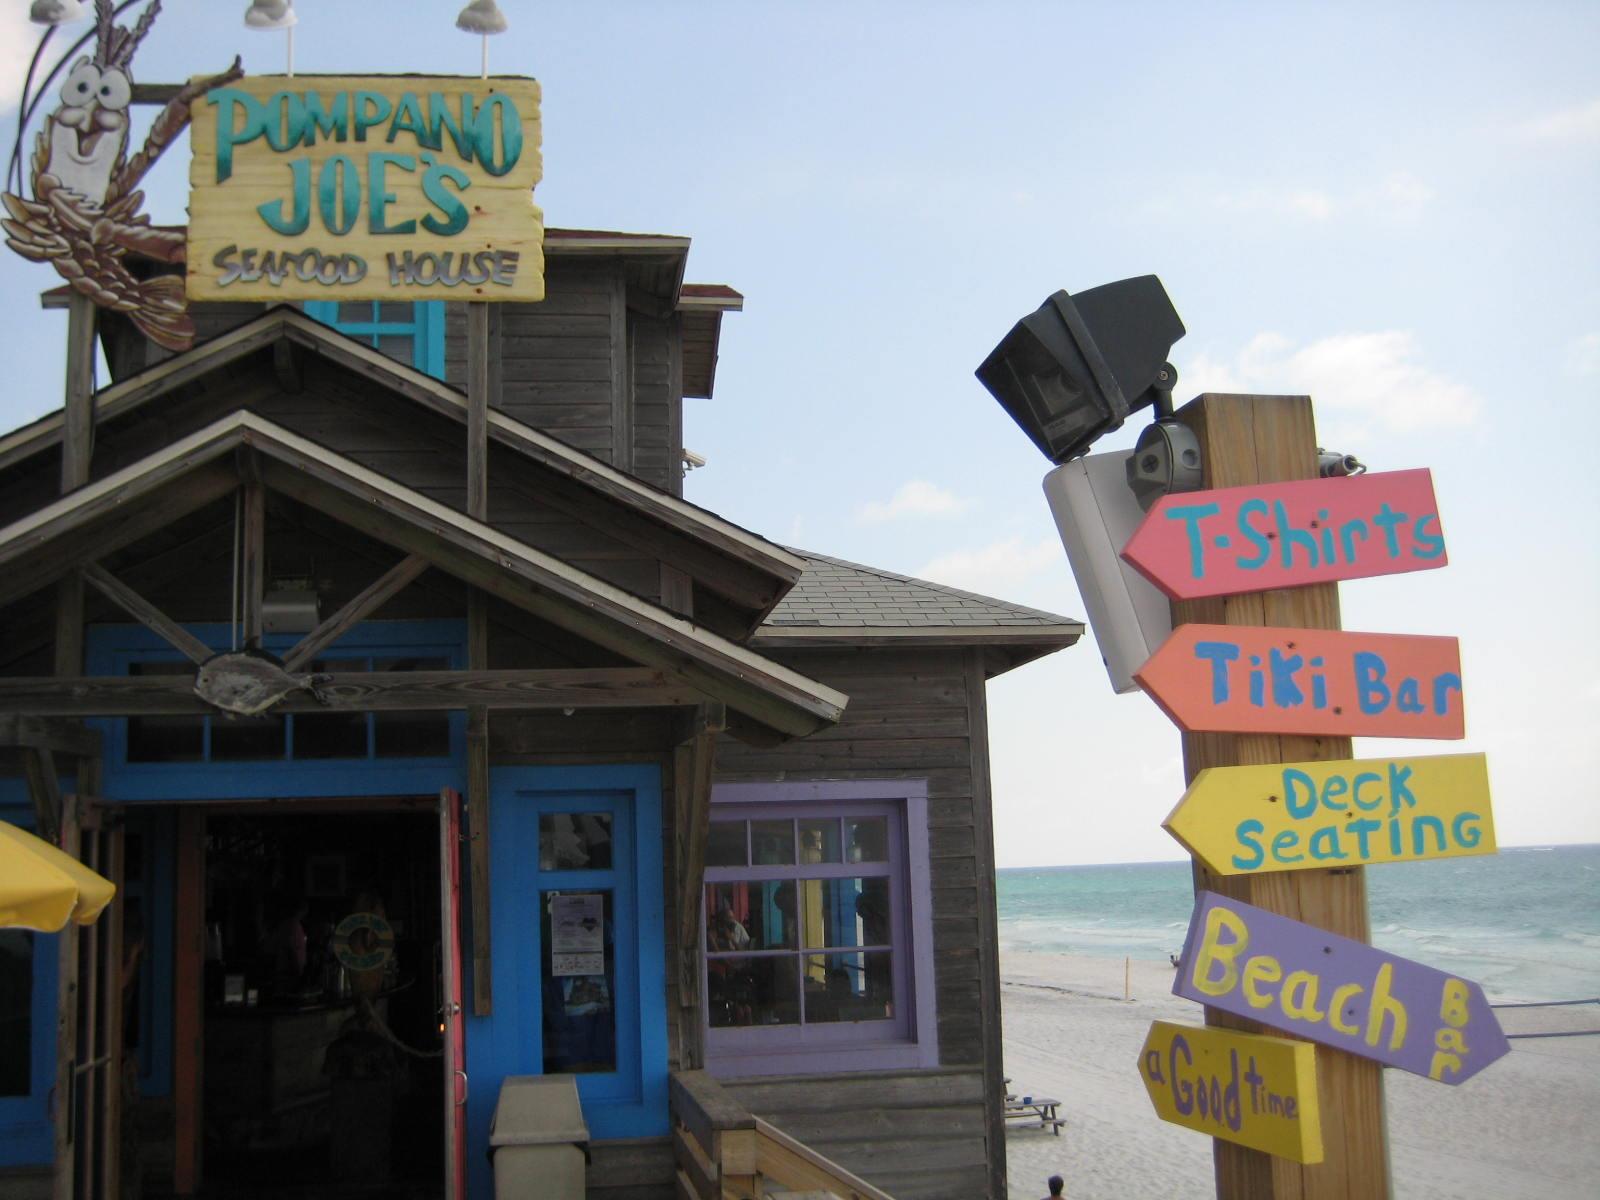 Pompano Joes just down the road for some local flavor